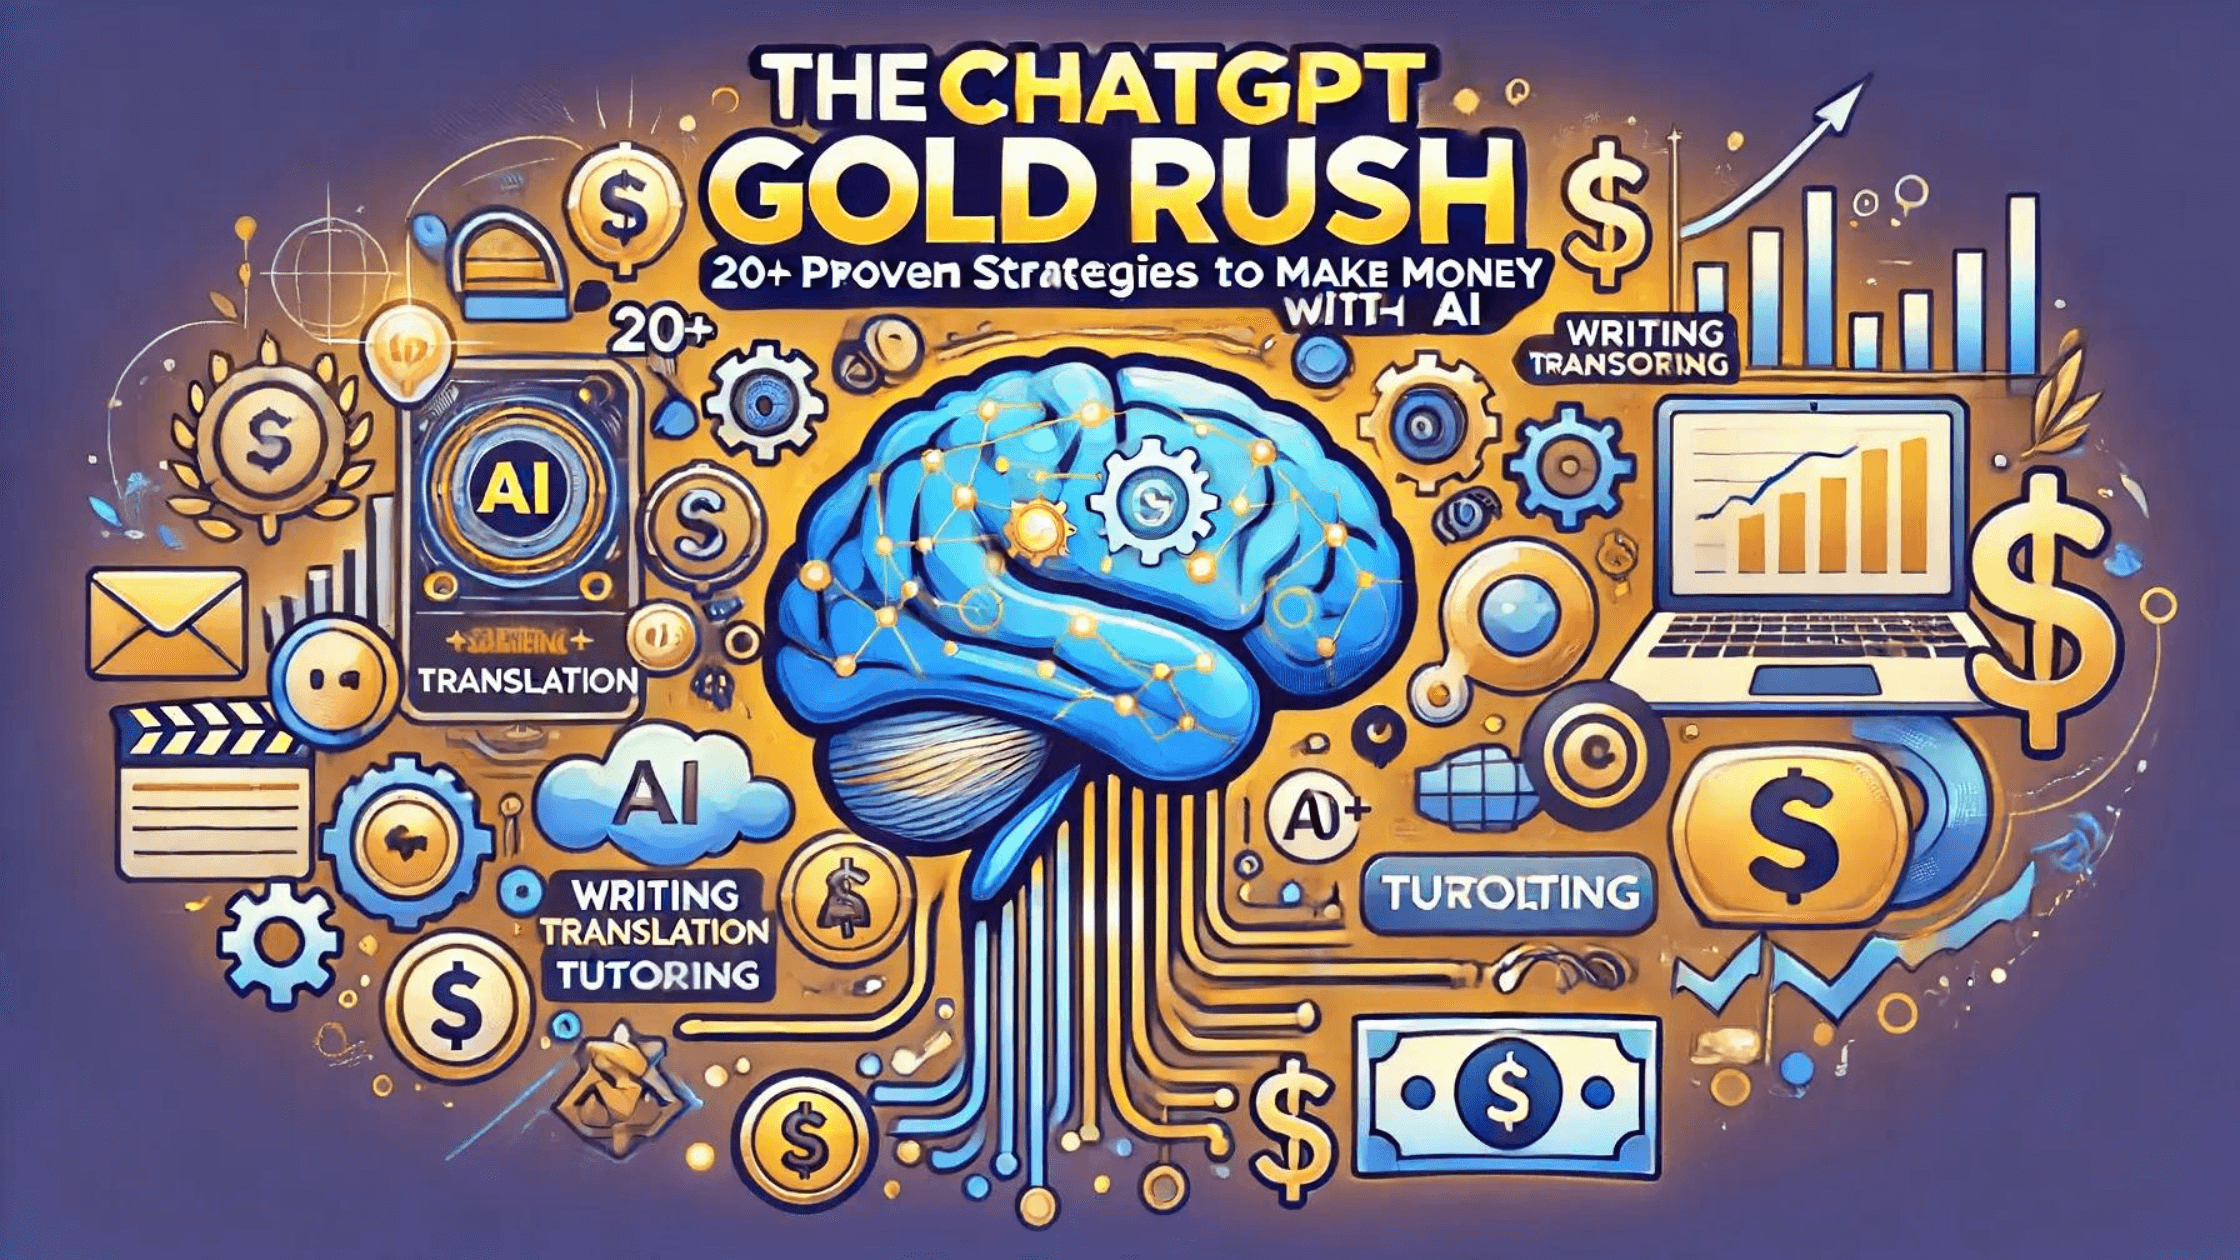 ChatGPT Gold Rush: 20+ Proven Strategies to Make Money with AI